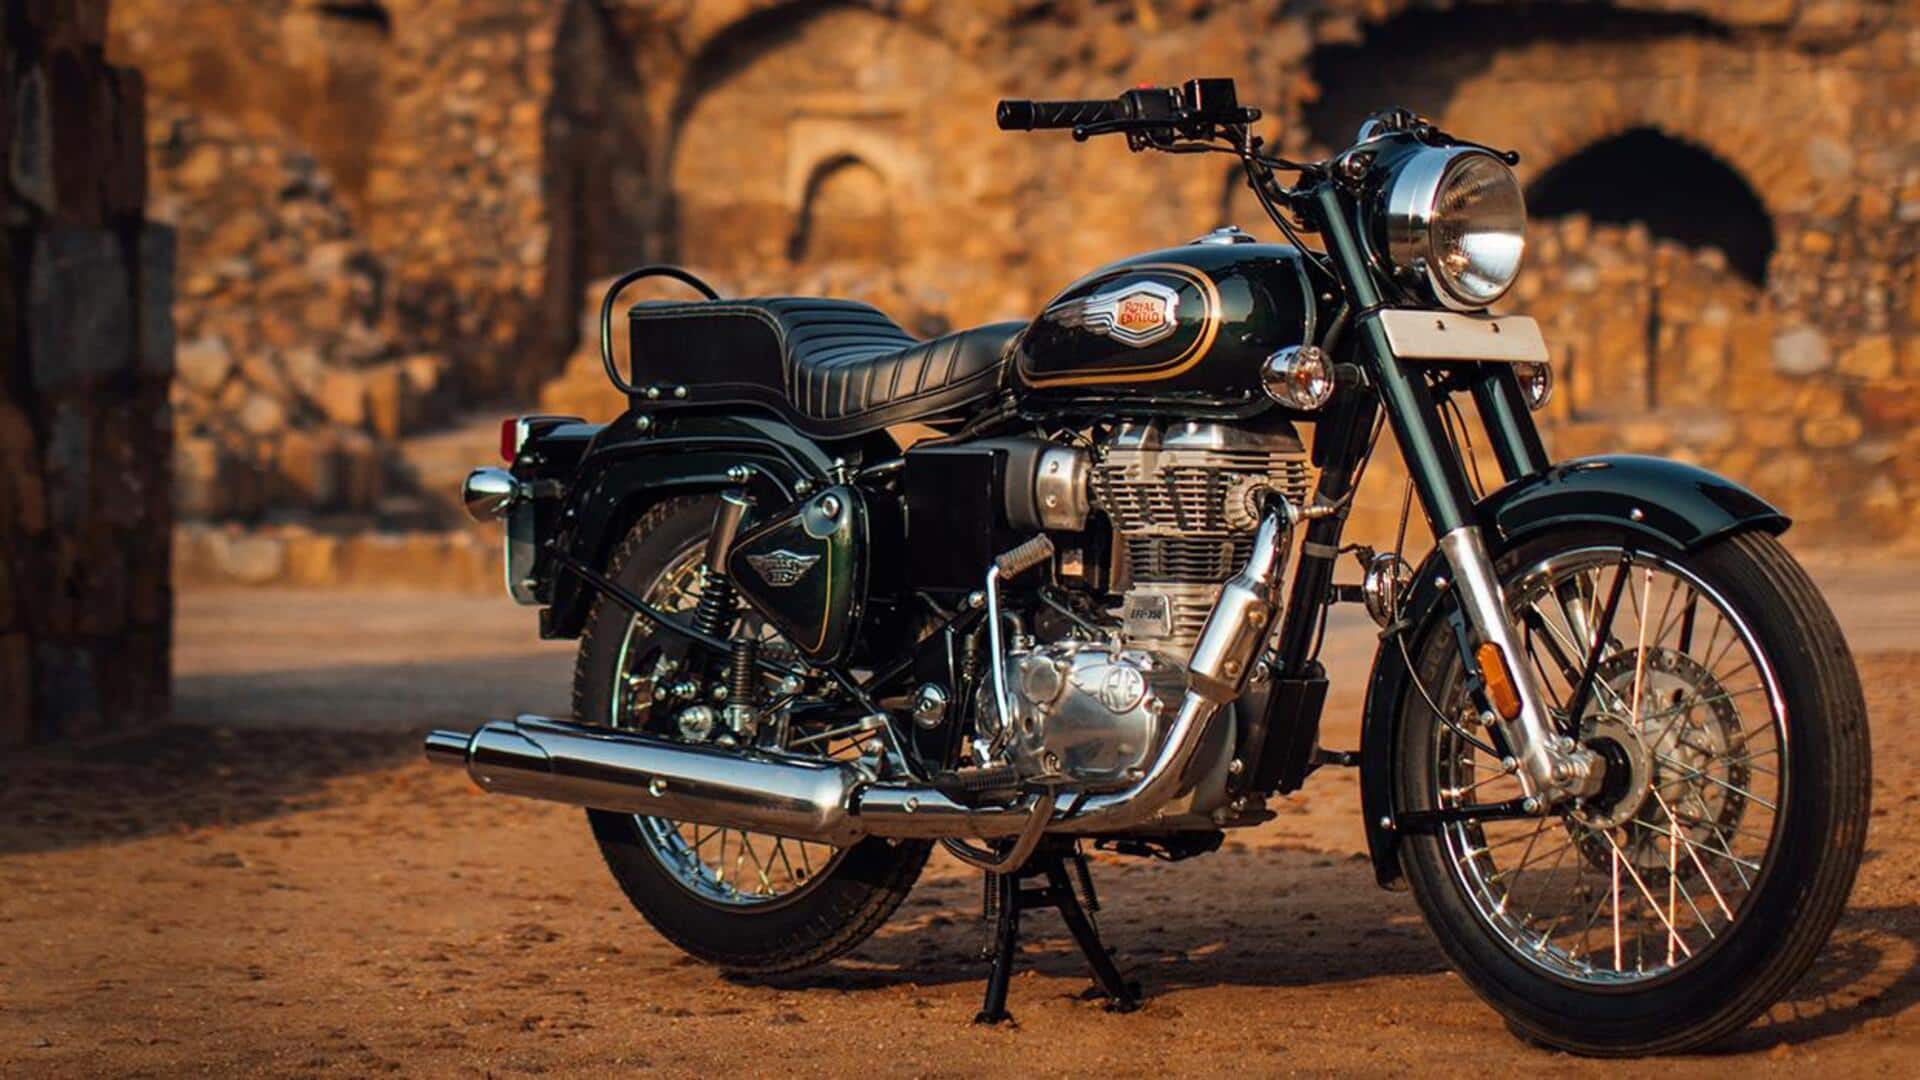 2023 Royal Enfield Bullet 350 to launch on September 1